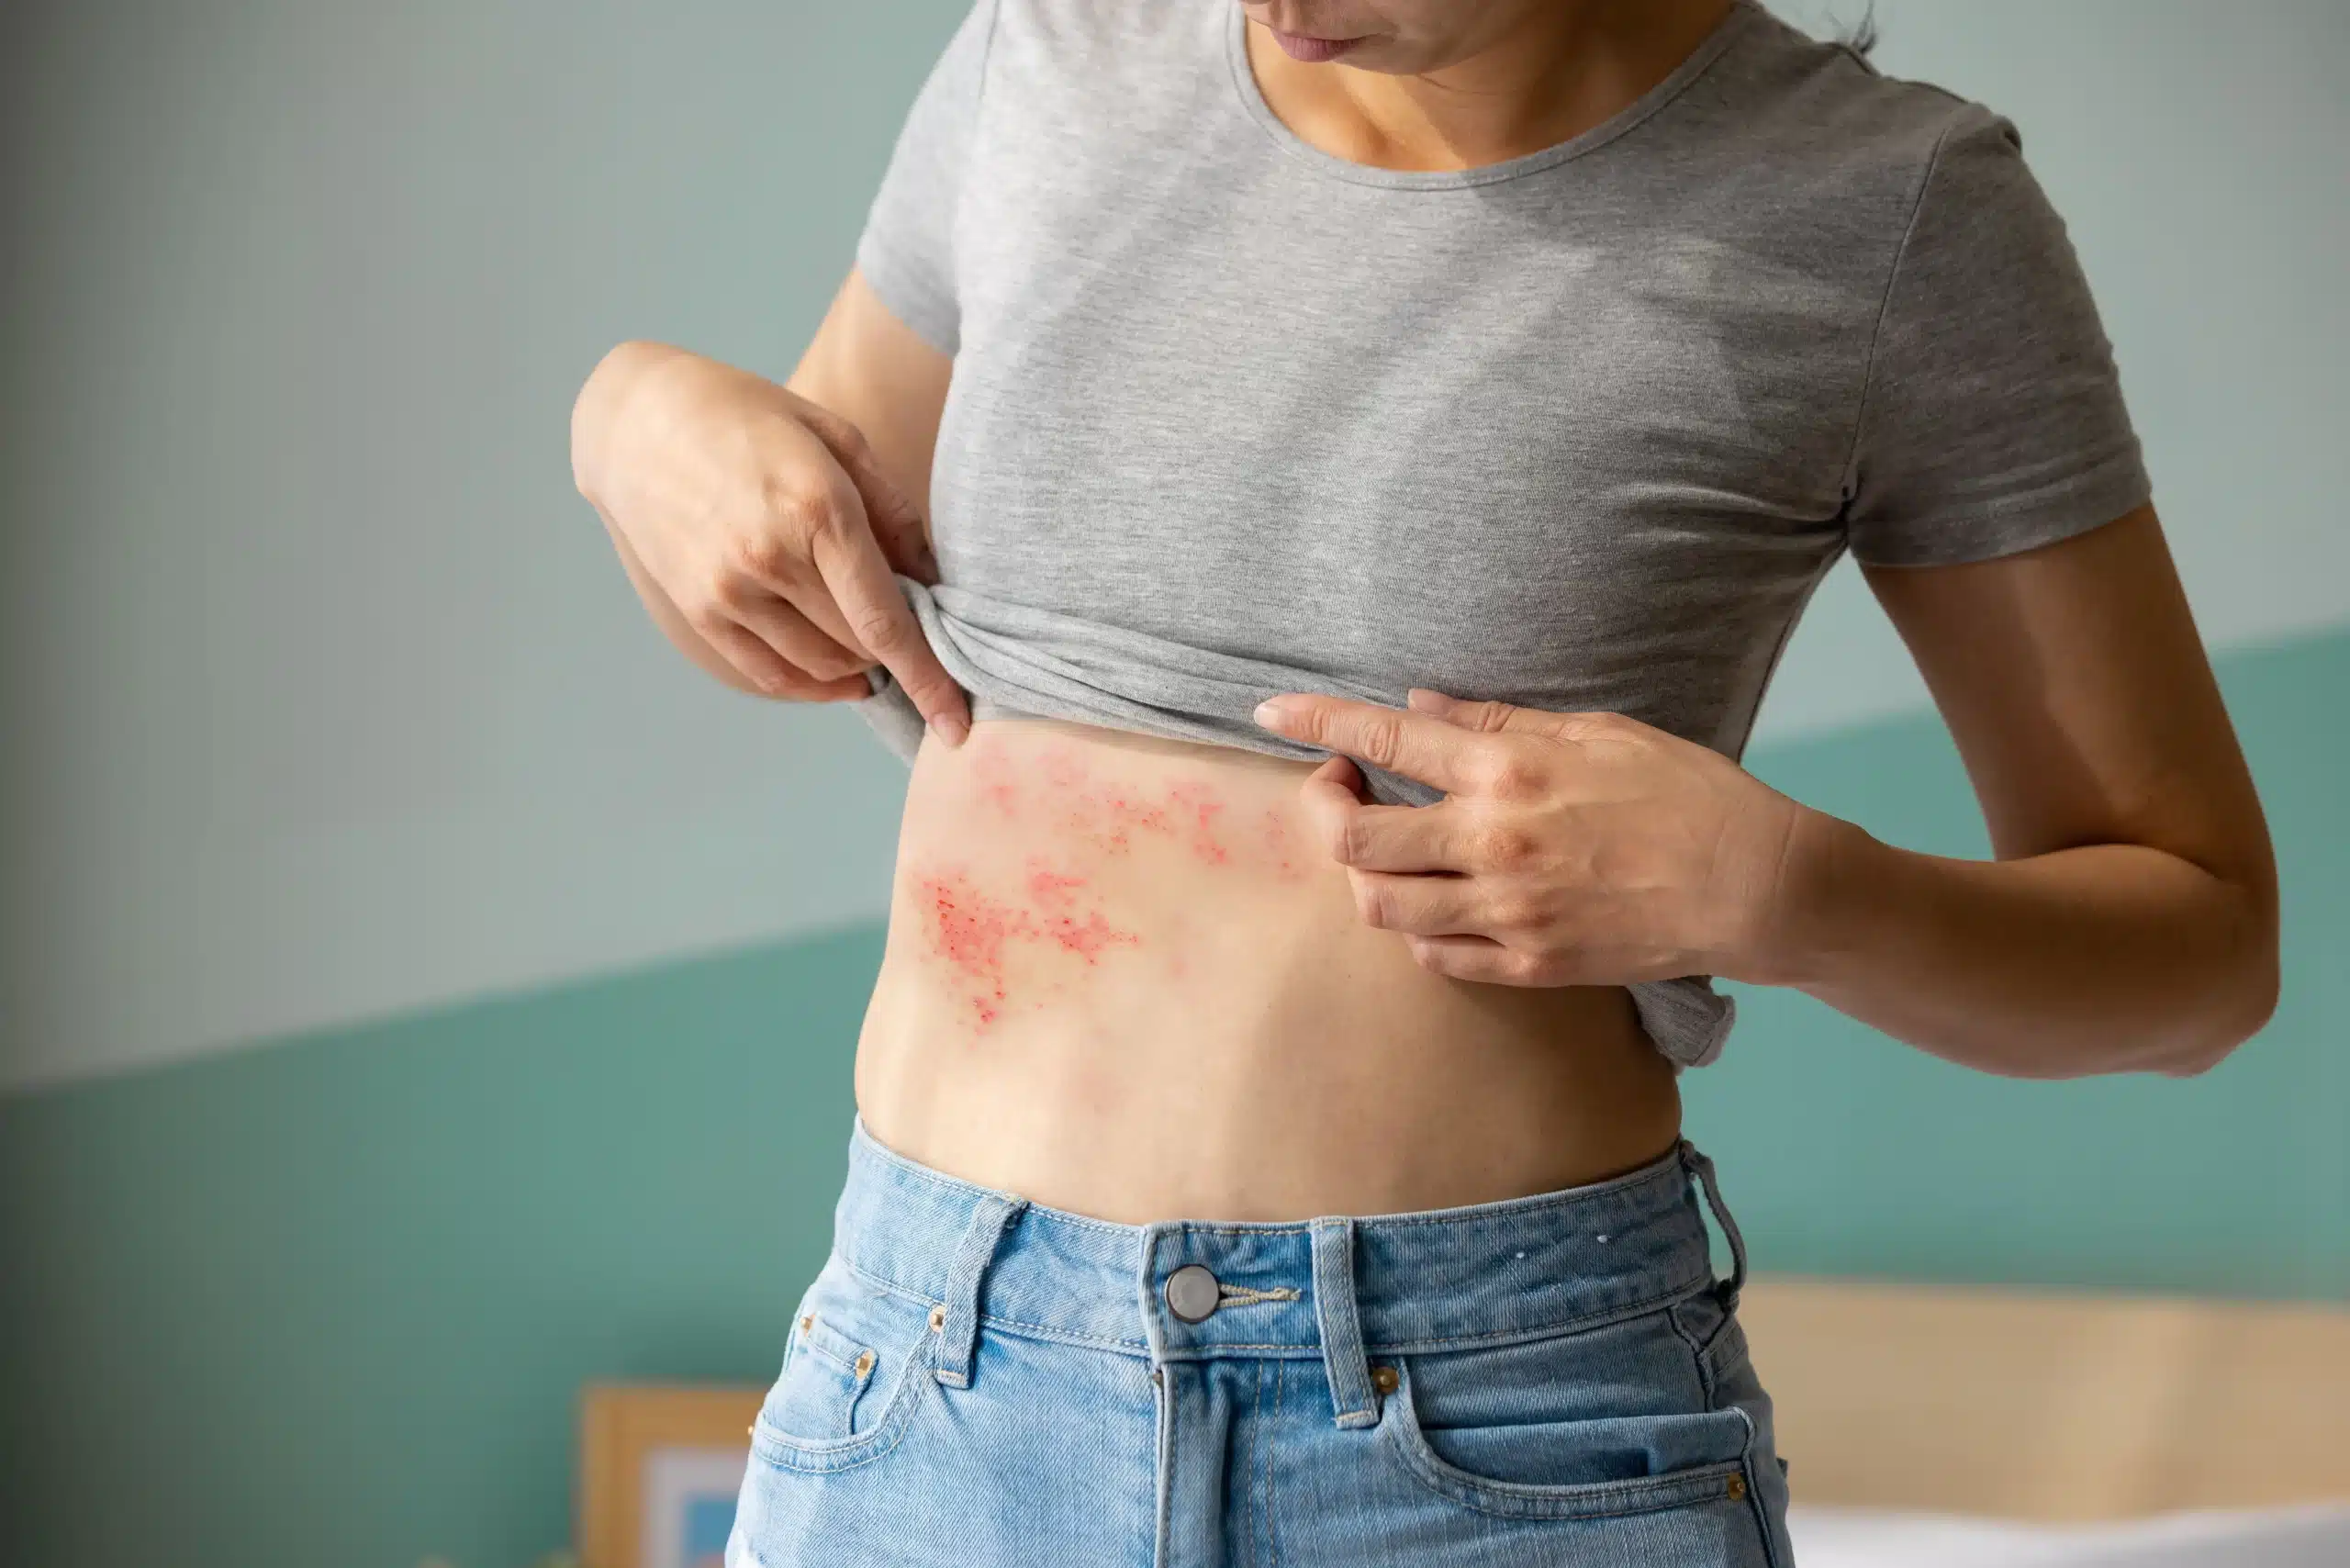 What-are-the-warning-signs-of-shingles